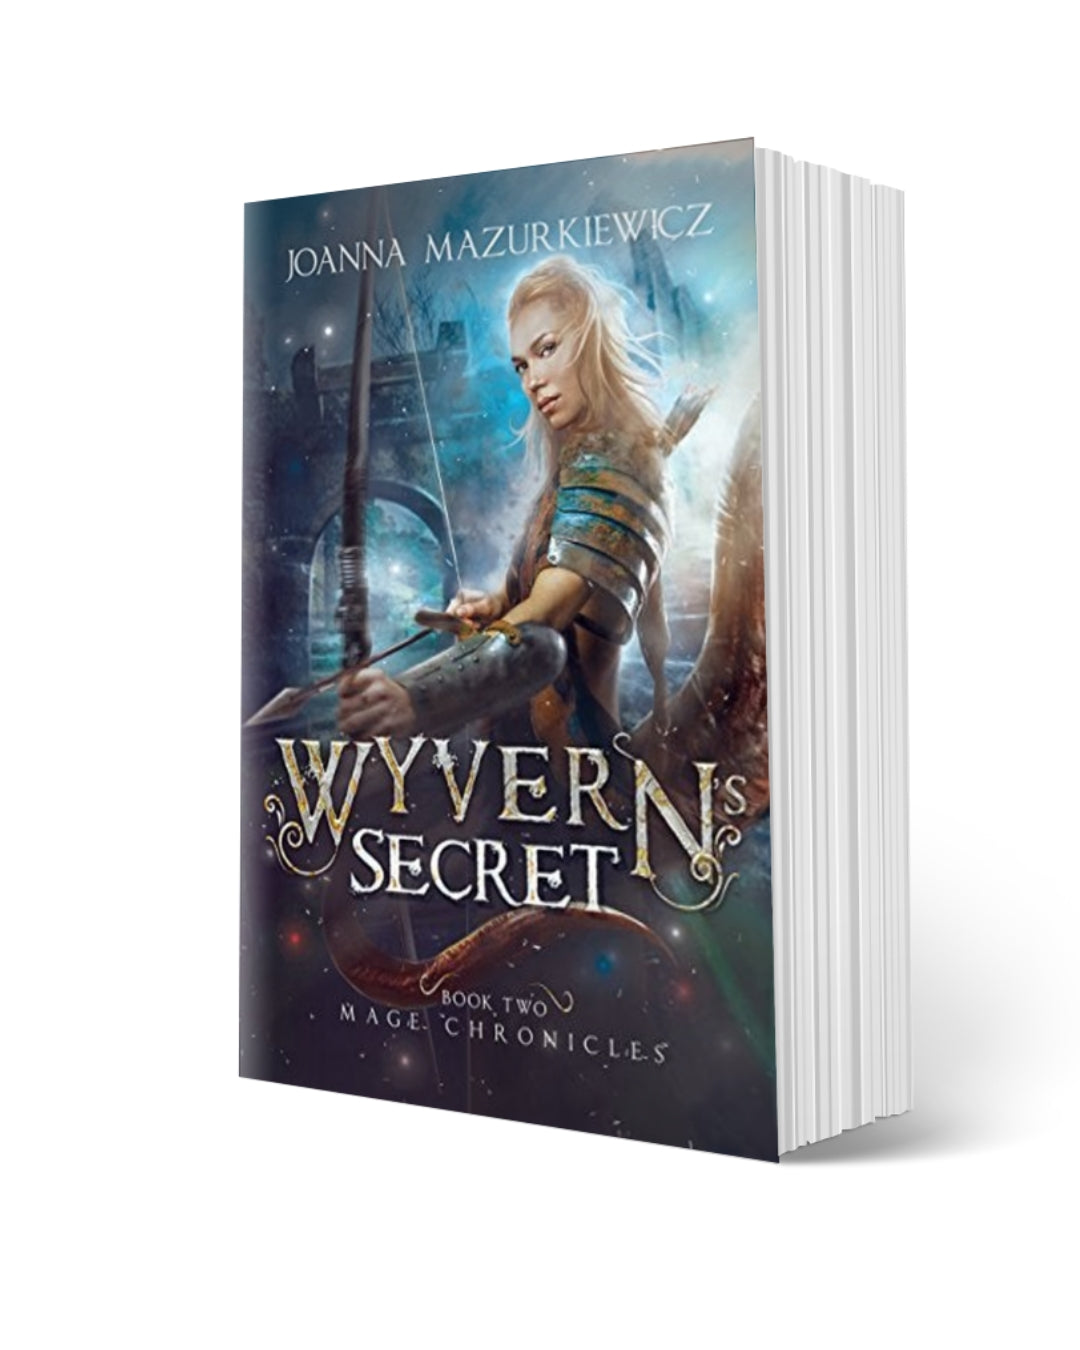 Paperback Copy of Wyvern's Secret ( Mage Chronicles Book 2)